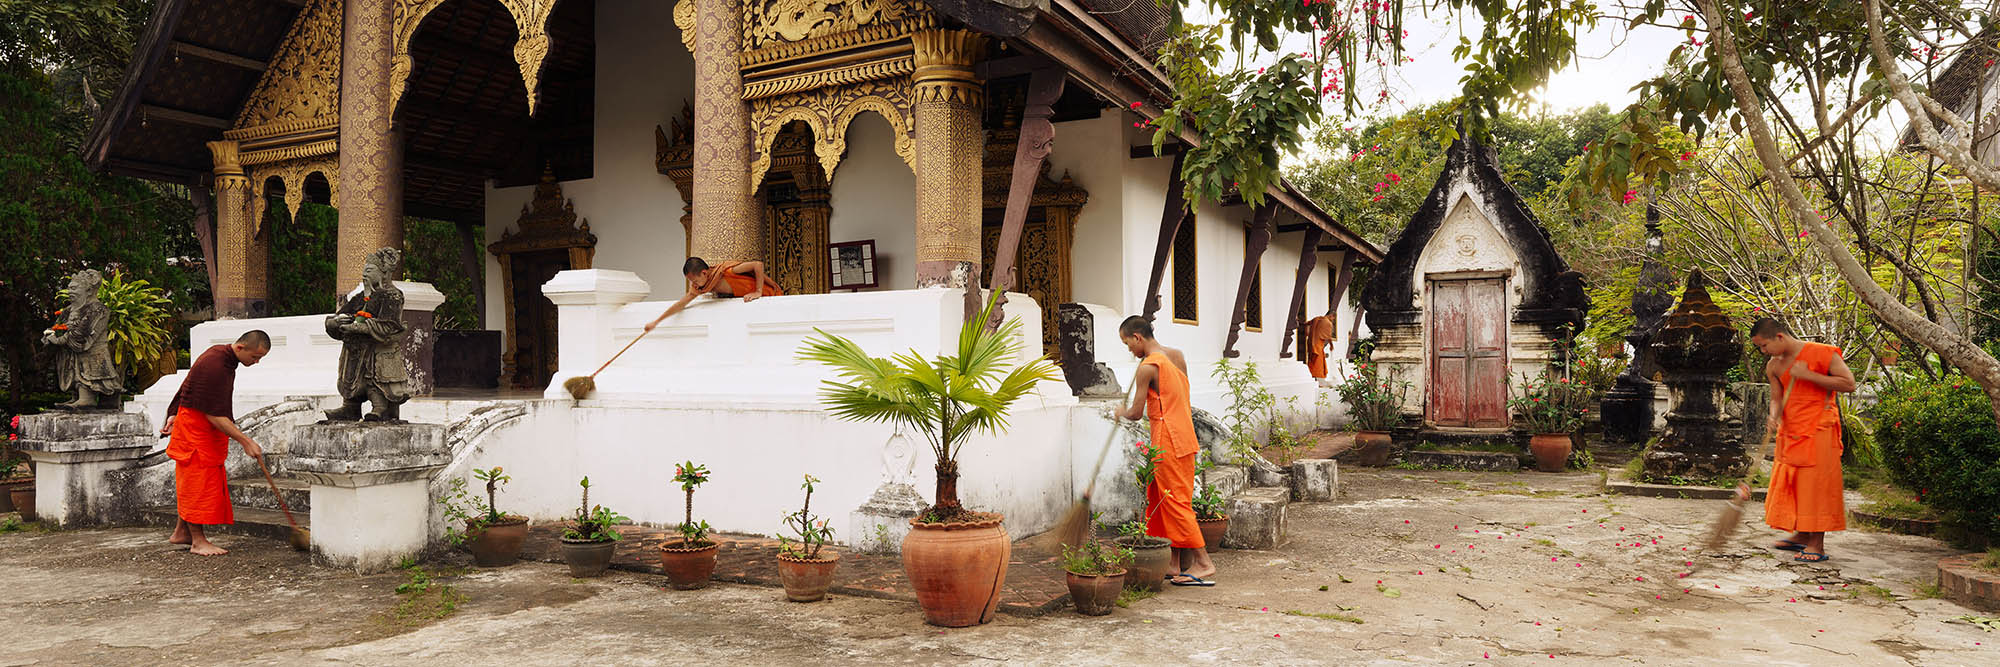 Monks sweeping the temple